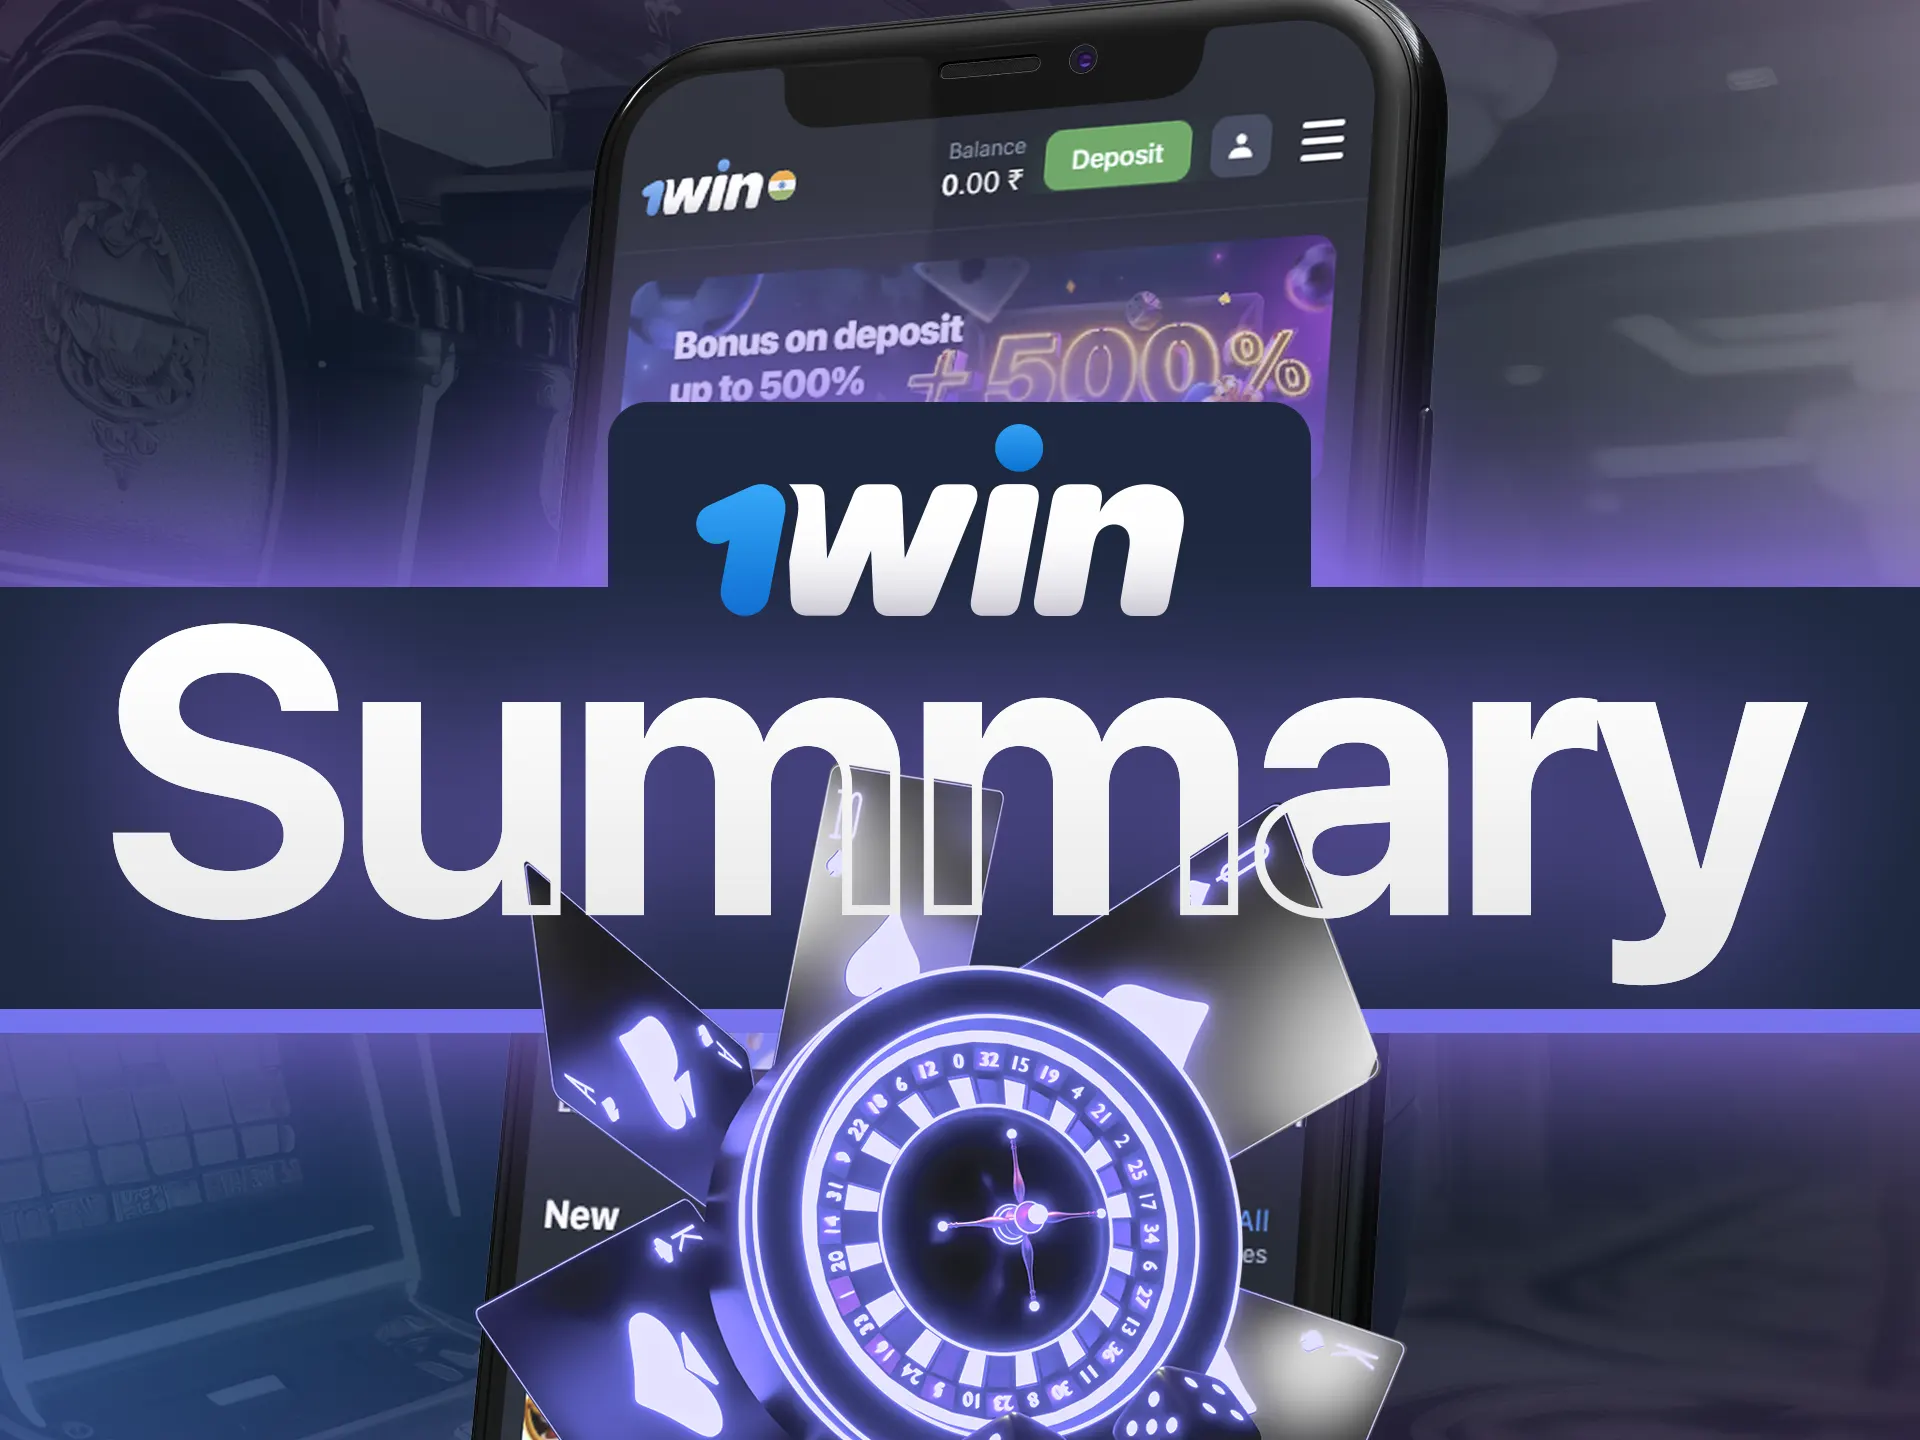 The 1win casino app provides a dynamic gaming environment that is brimming with exclusive features and thrilling chances to win big.